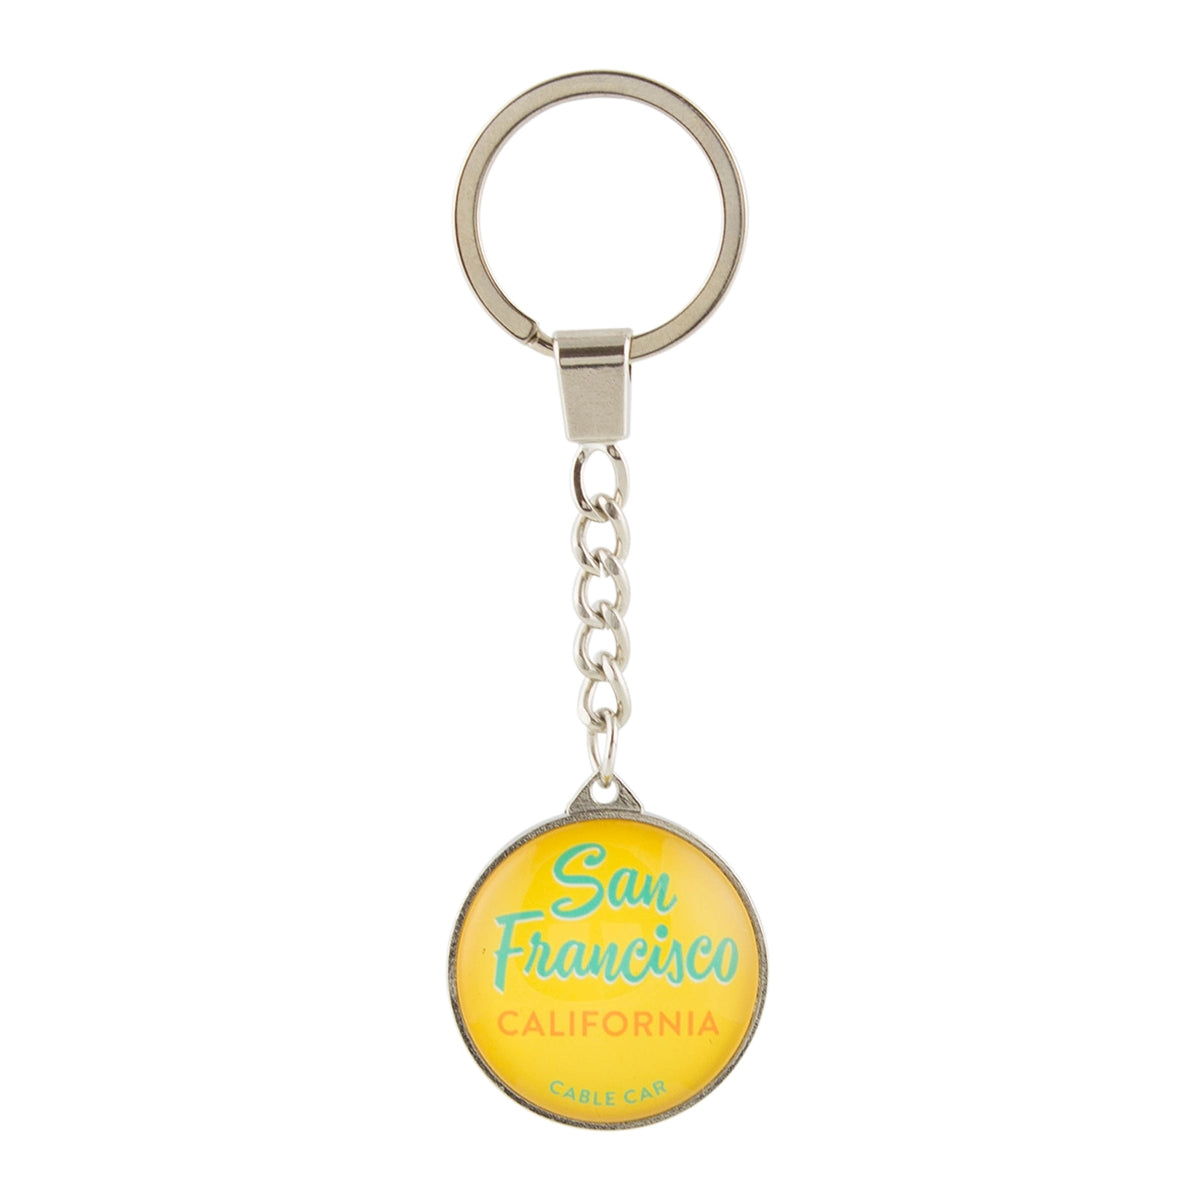 Colorful crystal keychain with text "San Francisco California Cable Car" in teal green and orange on yellow background.